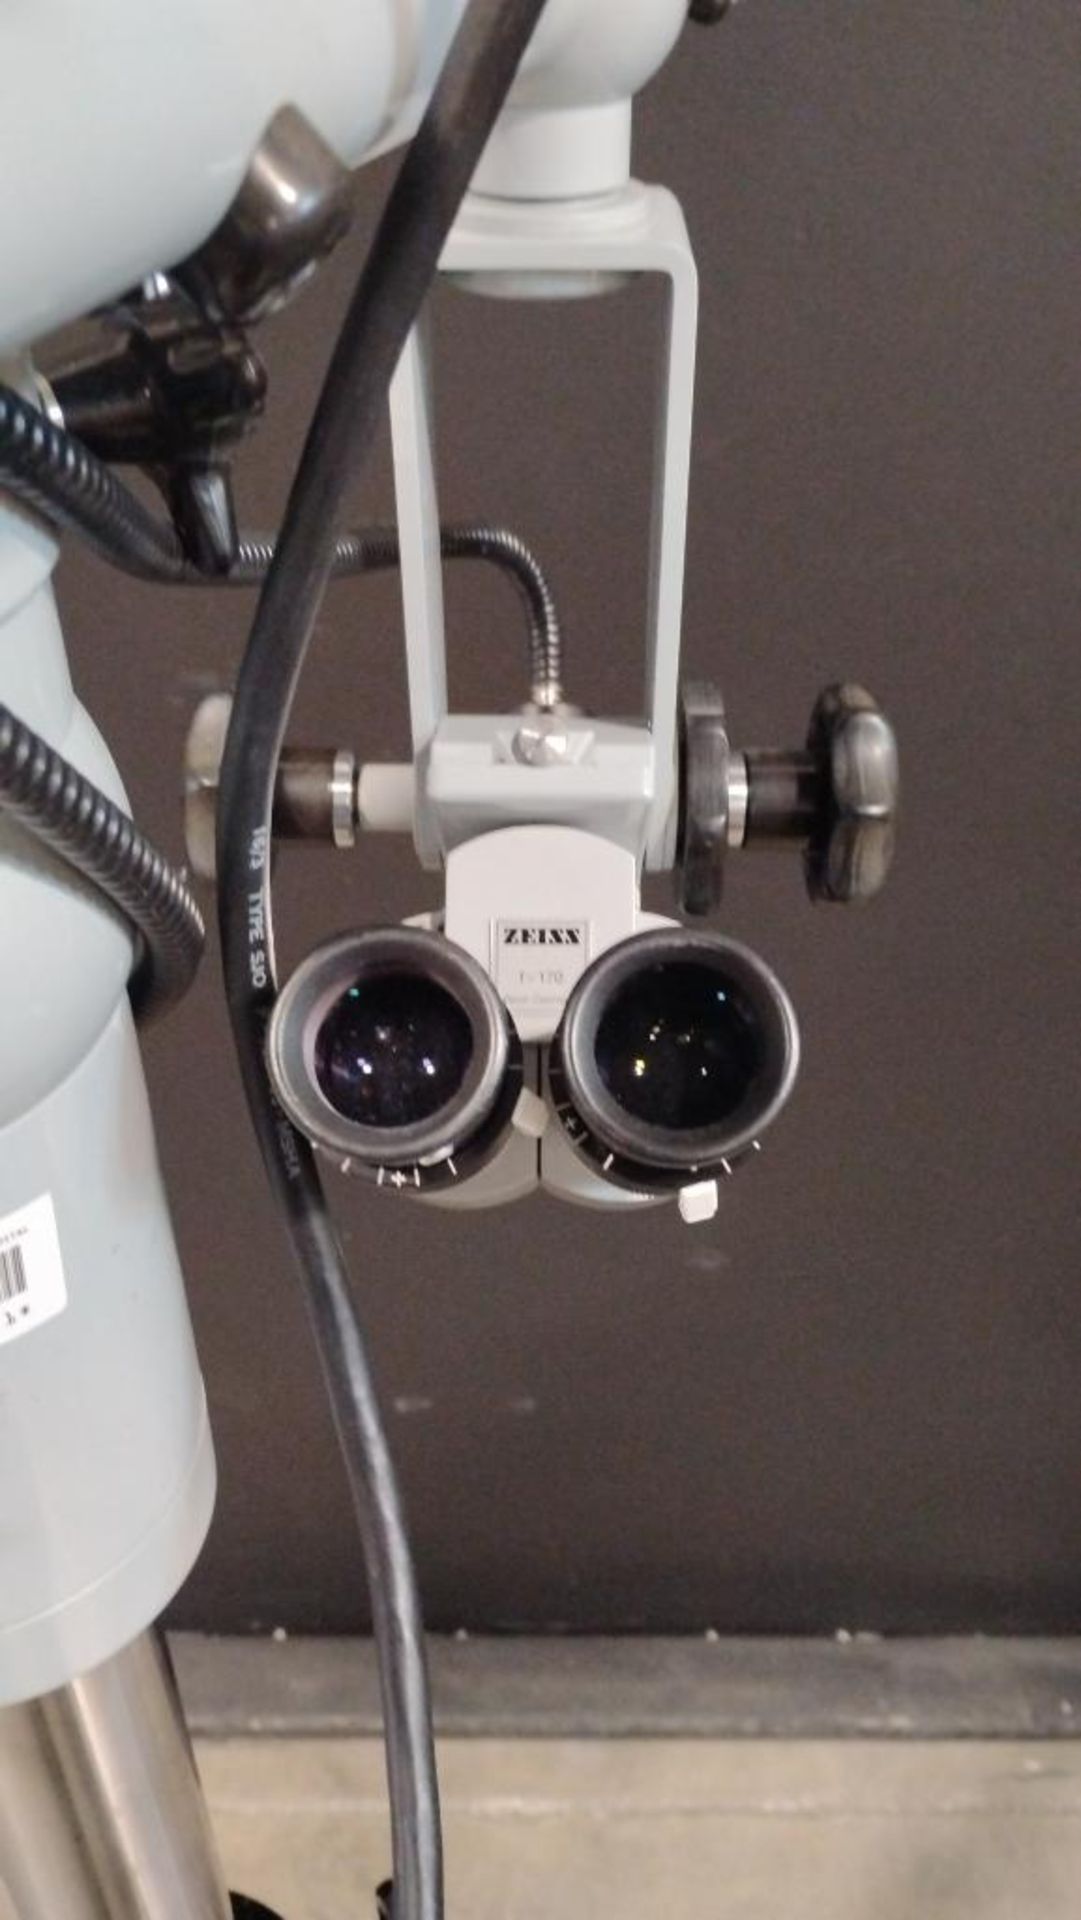 CARL ZEISS SURGICAL MICROSCOPE TO INCLUDE SINGLE MOUNT BINOPCULAR WITH EYEPIECES BOTH ARE (10X/22B) - Image 4 of 5